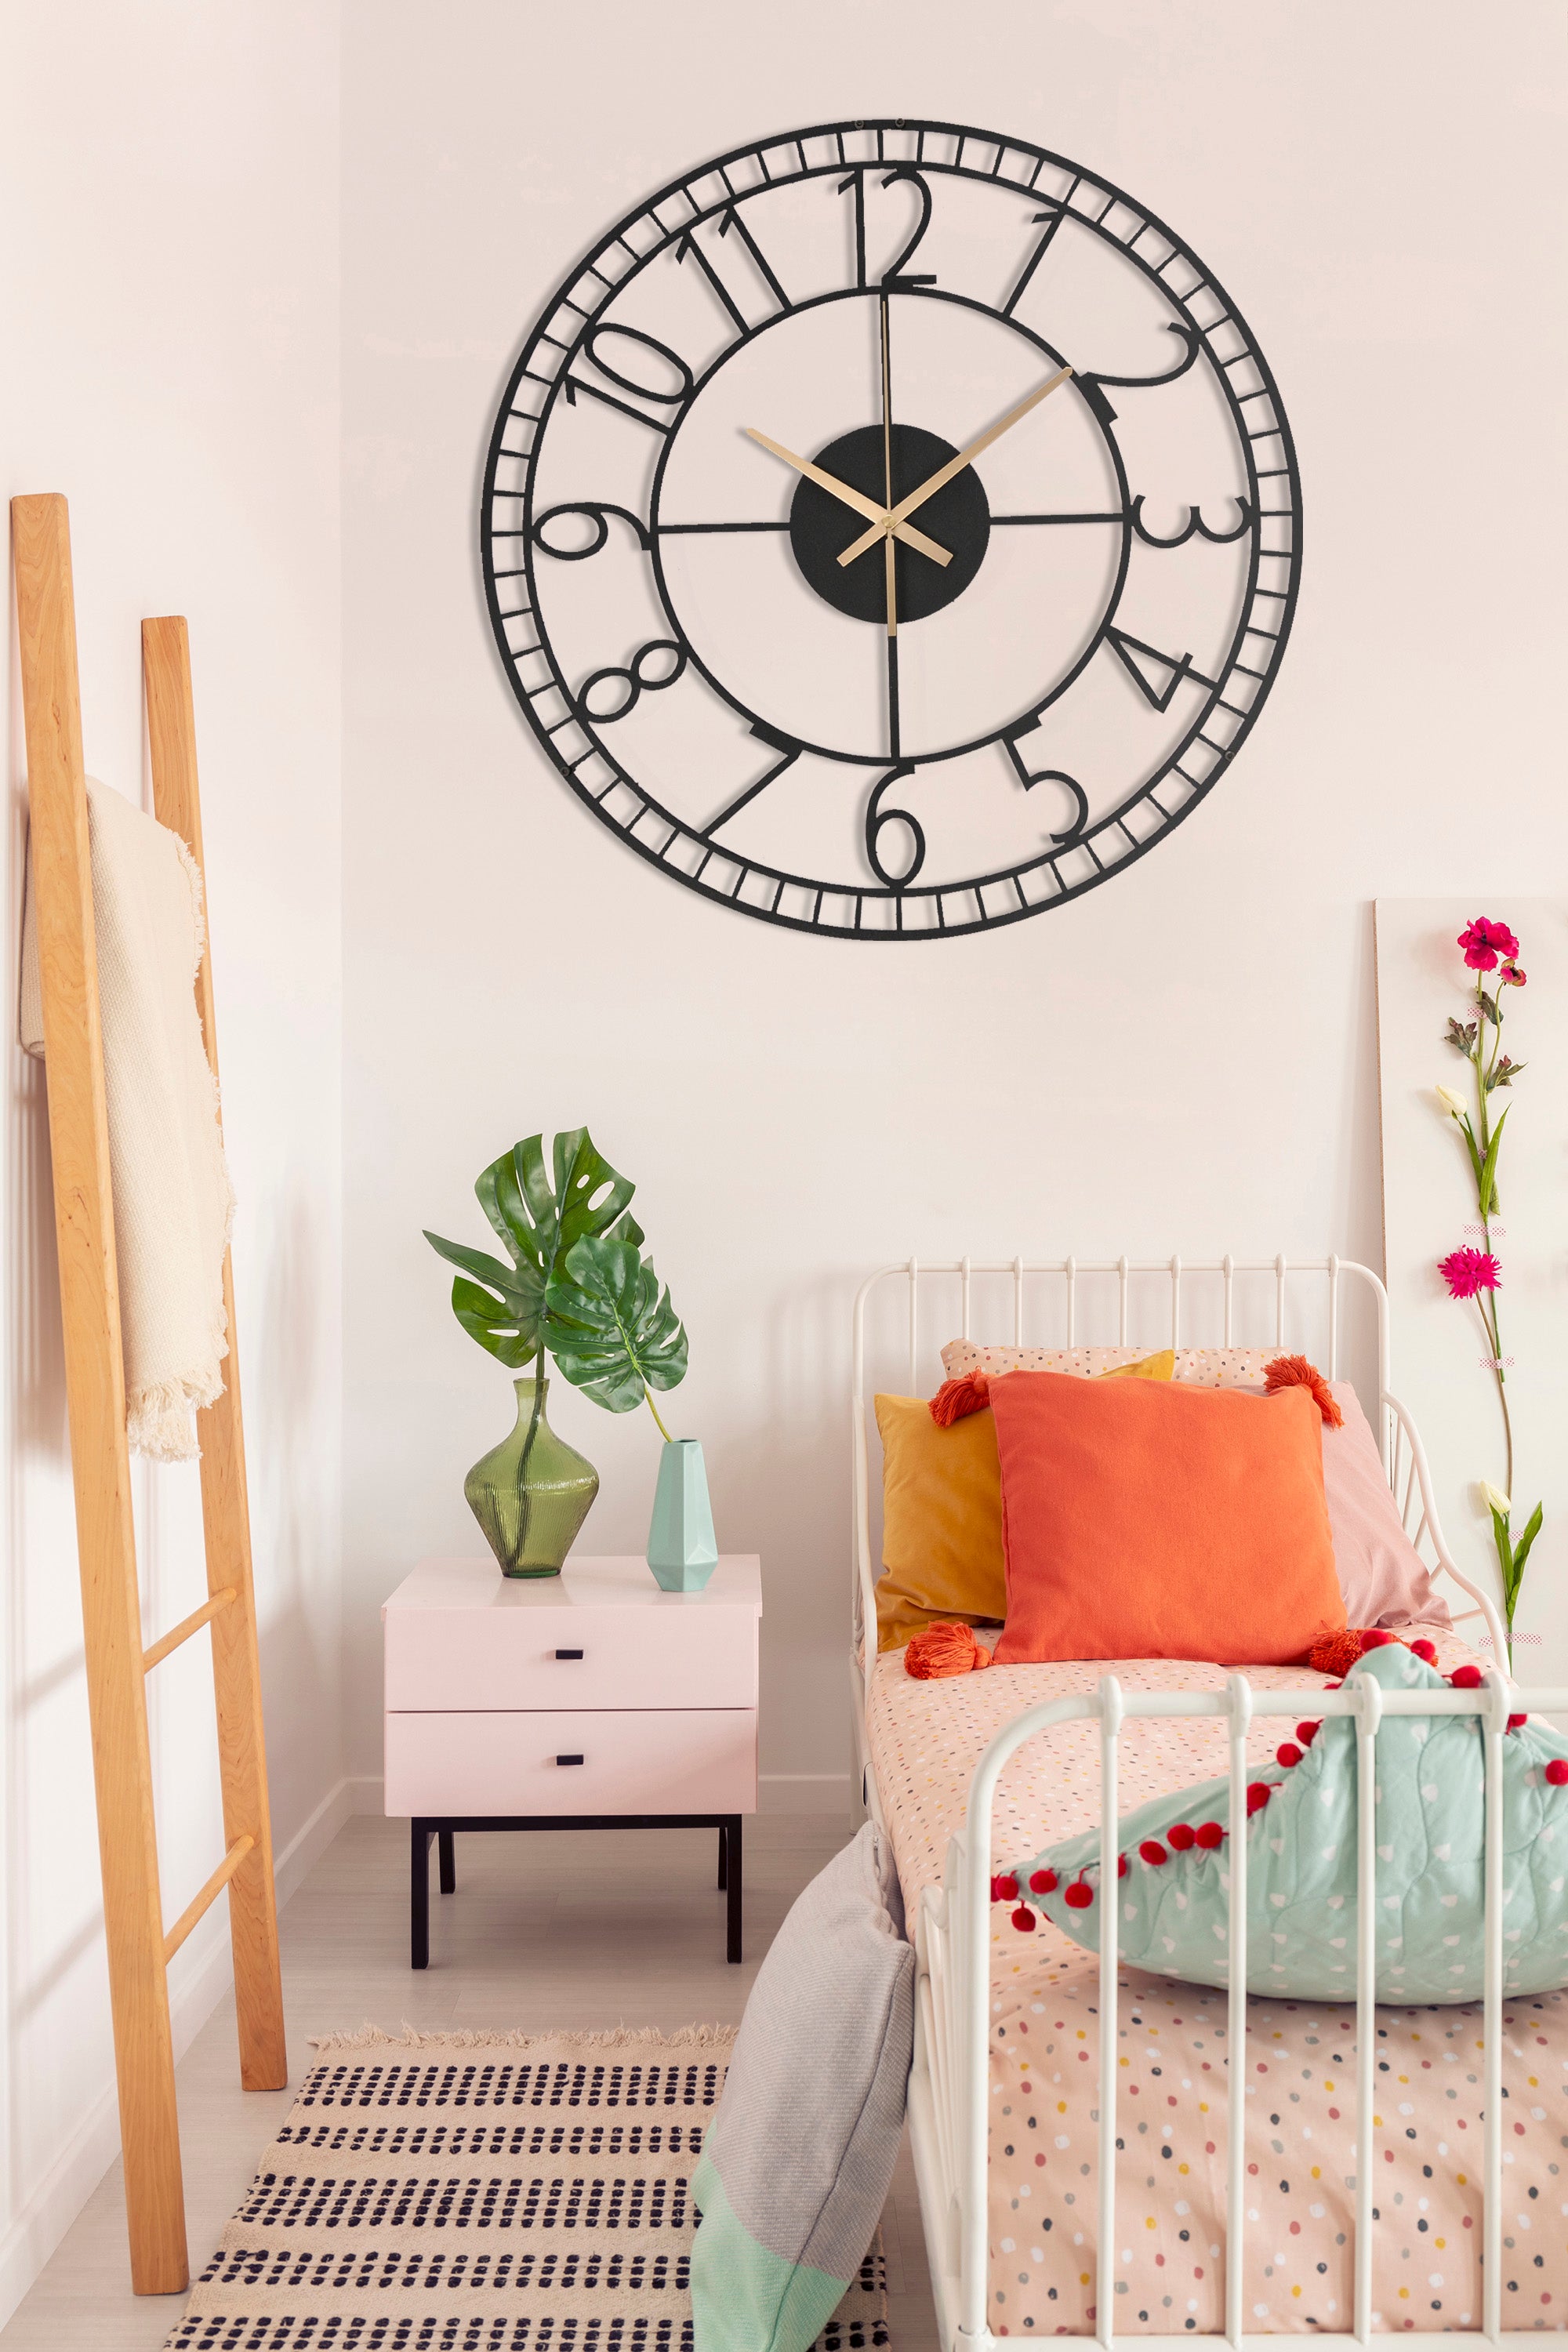 Modern Oversize Wall Clock With Numbers